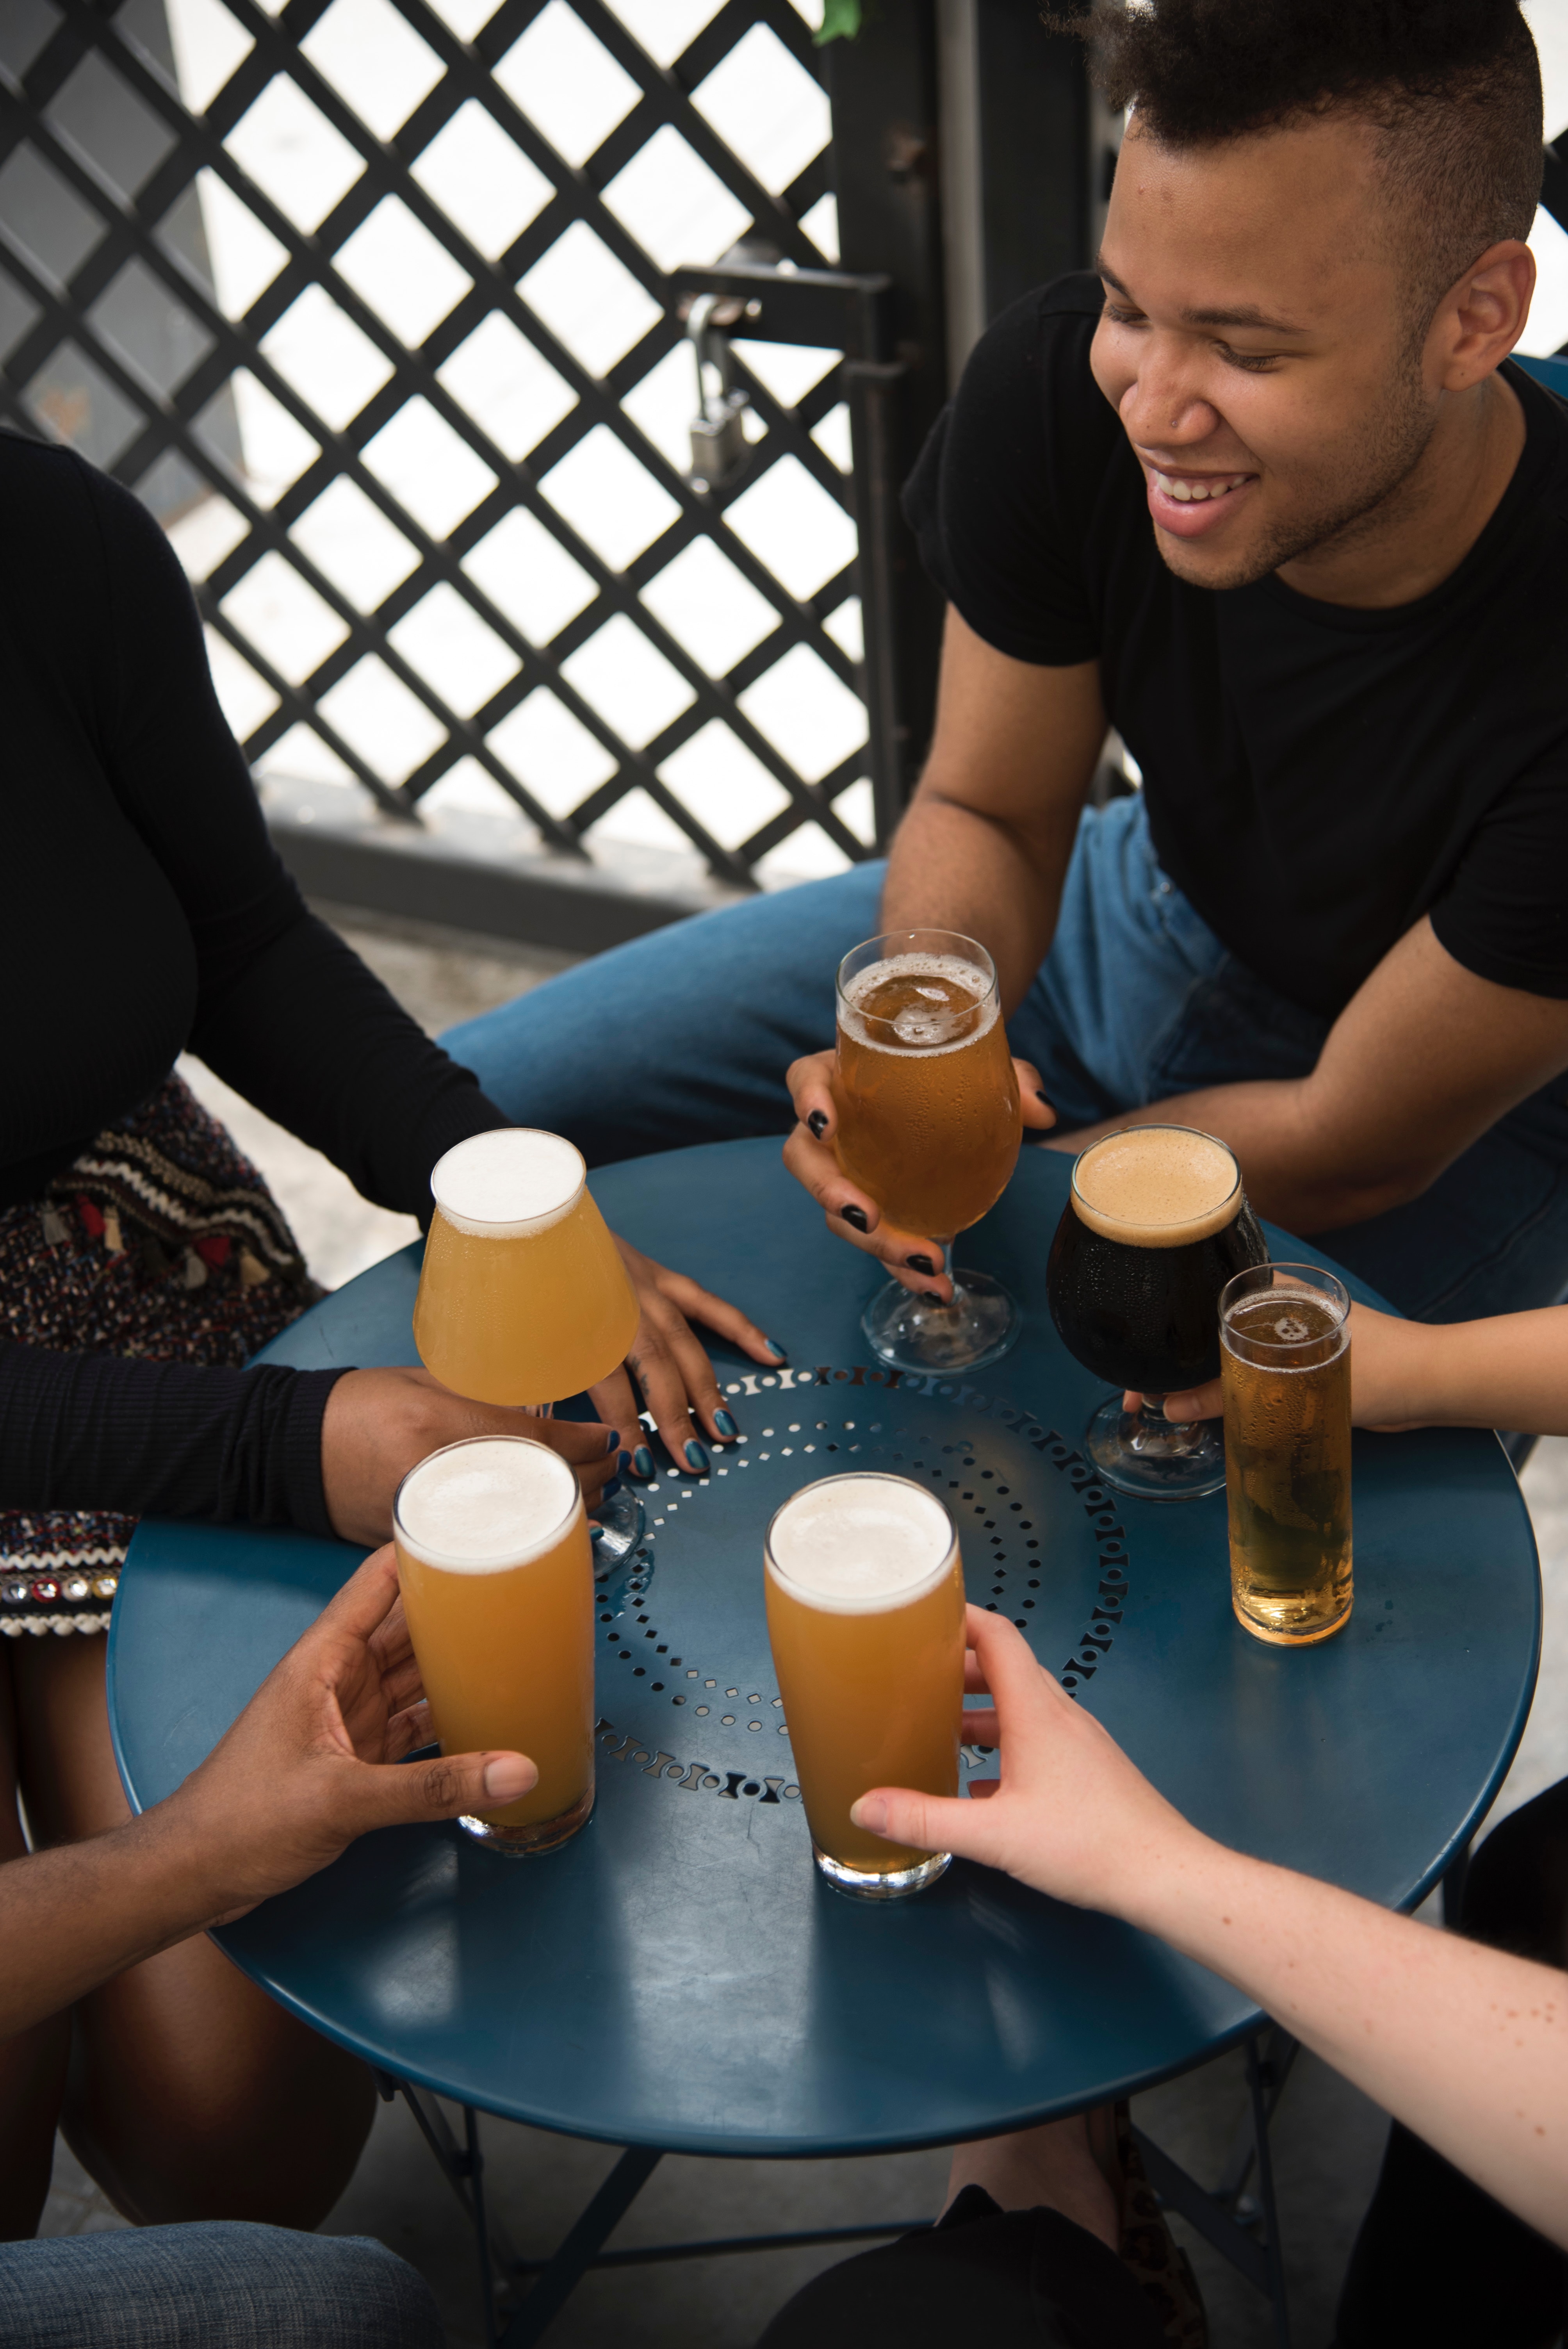 What to Consider When Looking for a Beer Tour – Our Guide